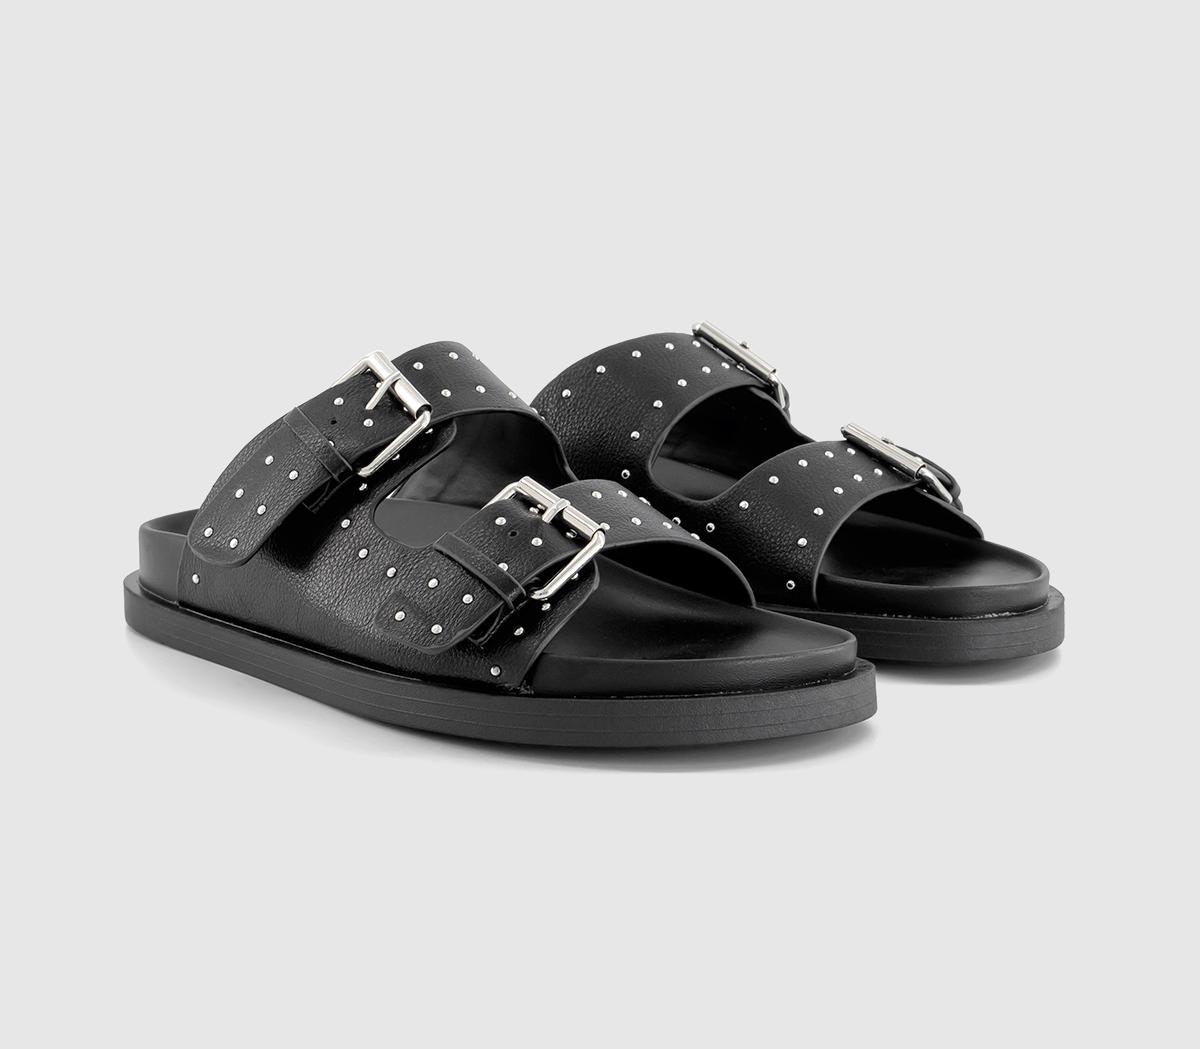 OFFICE Womens Scarlett Double Strap Studded Footbed Sandals Black, 6